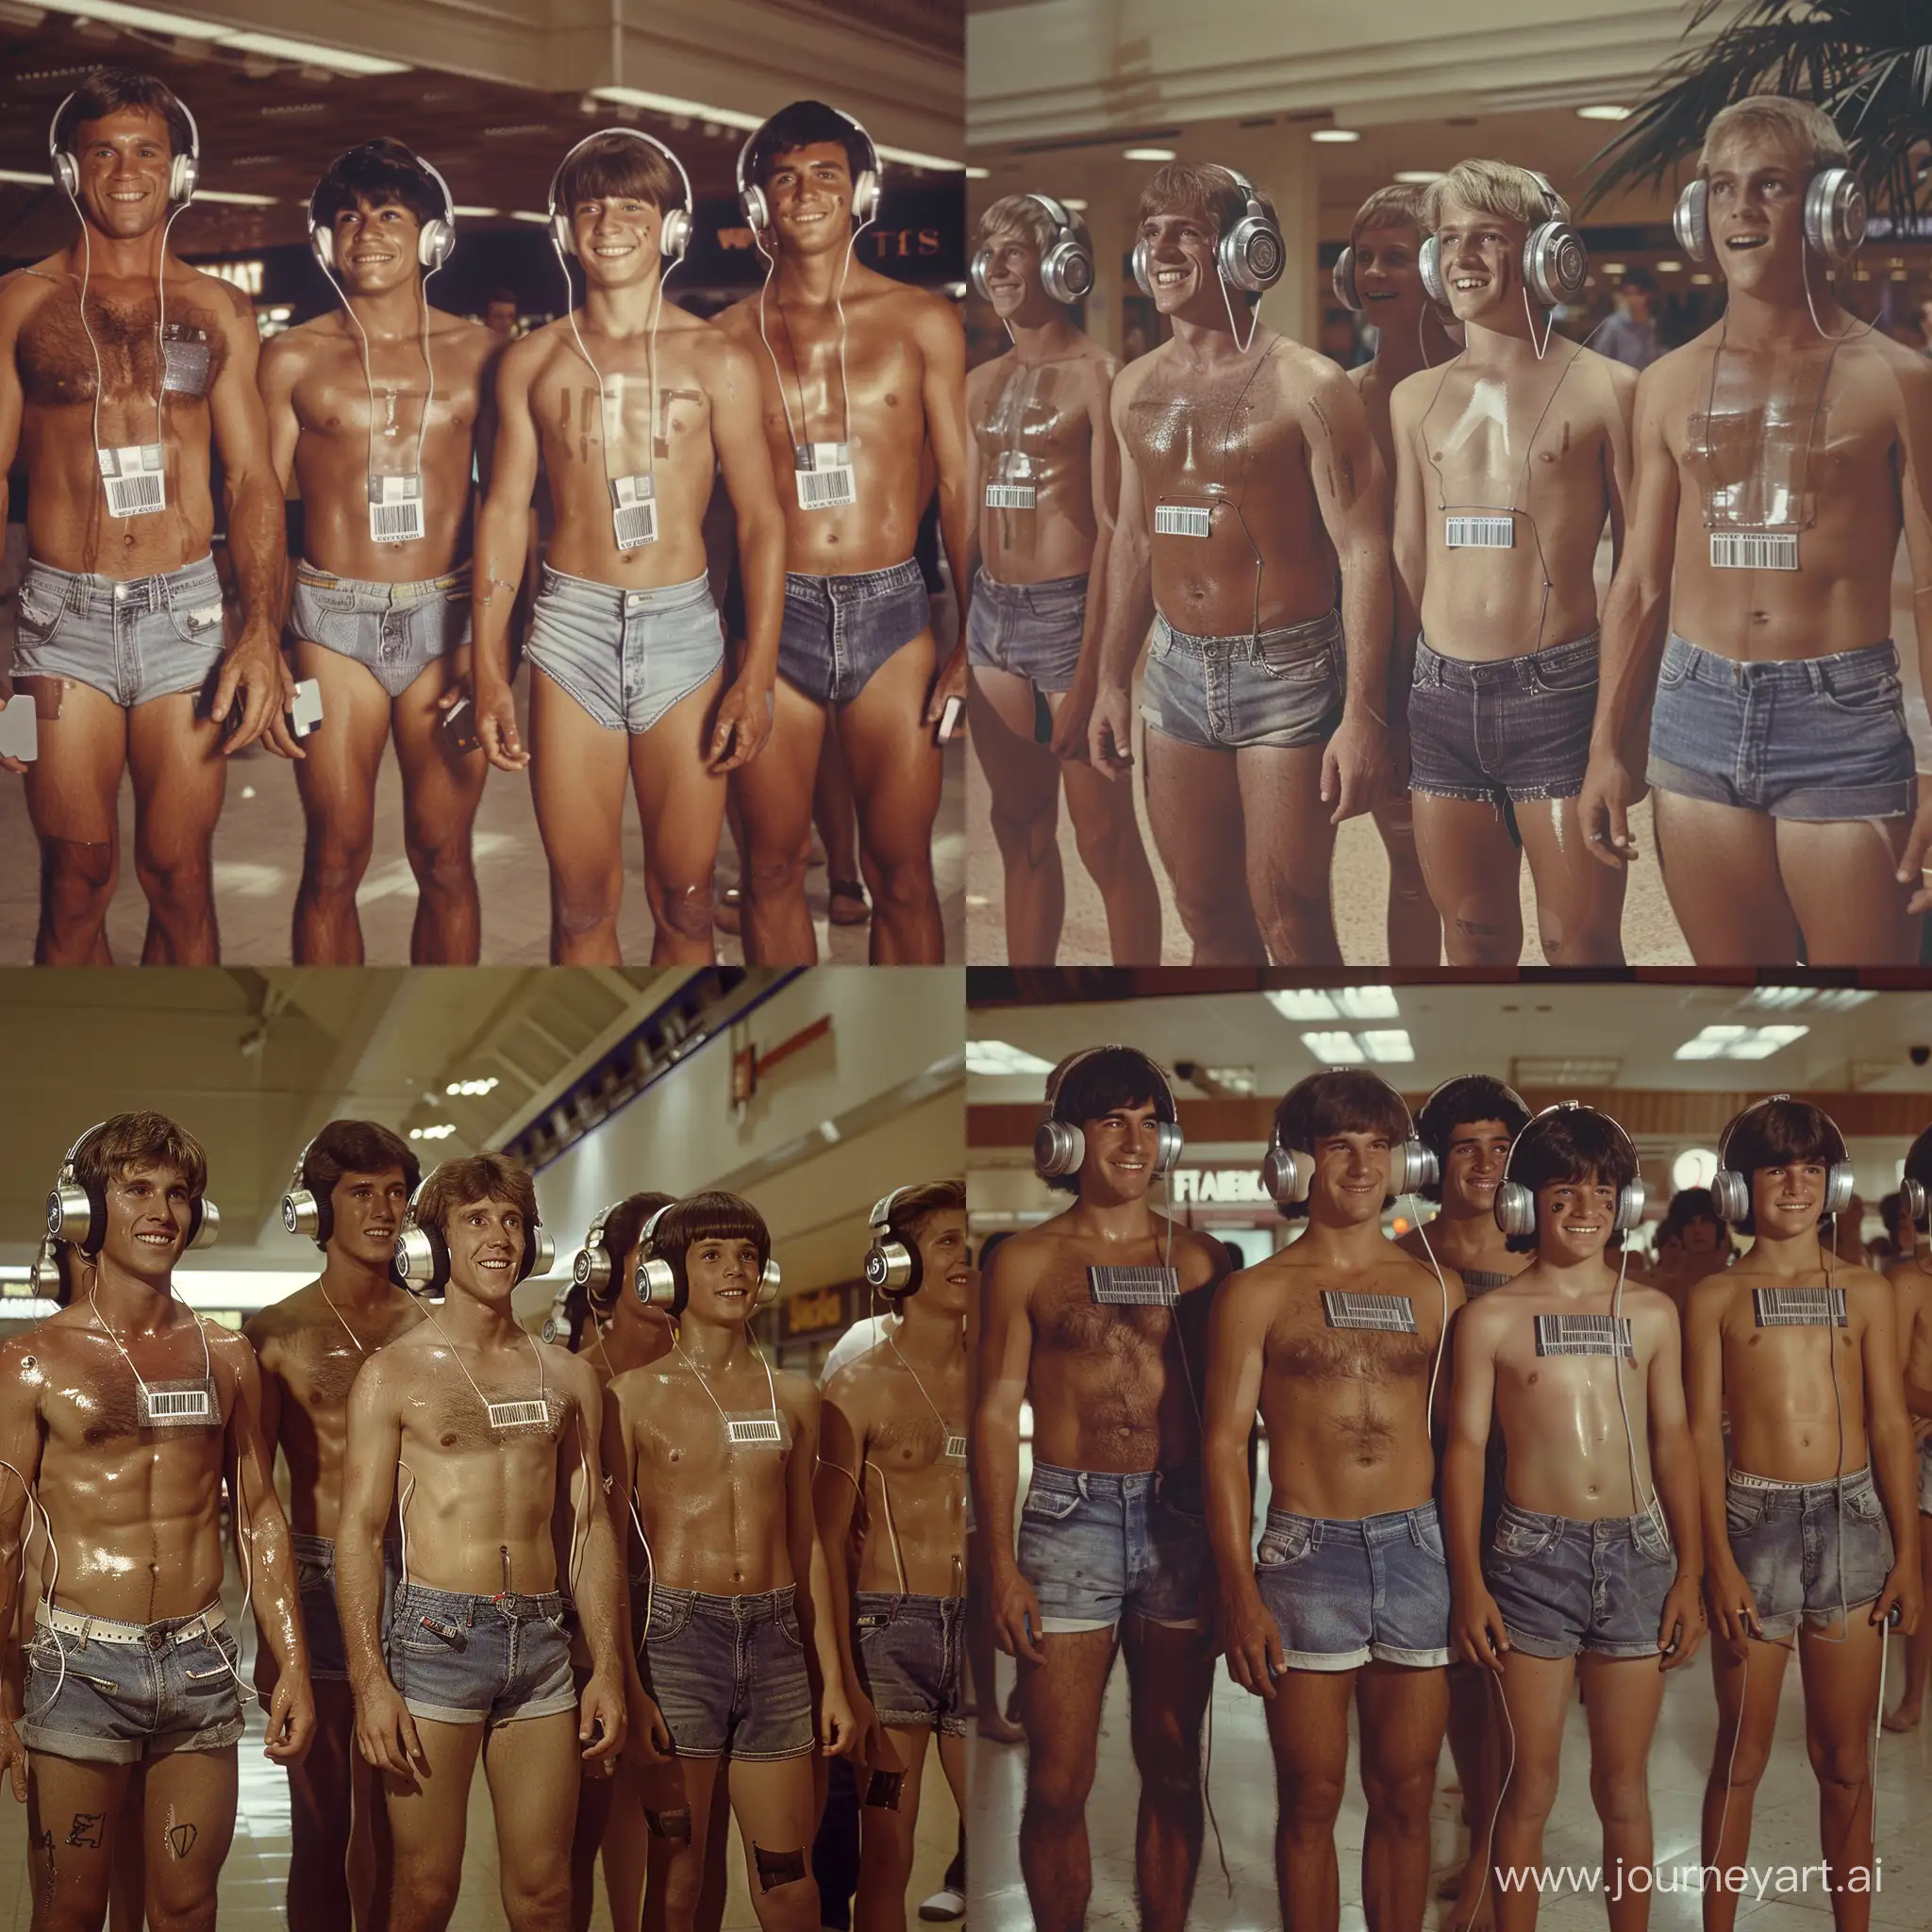 Handsome muscular middle-aged men and handsome muscular college-age boys each wear silver headphones and fitted denim cutoff shorts, dazed smiles, small barcode attached to each man's chest, 1970s shopping mall setting, facing the viewer, mass indoctrination, color image, hyperrealistic, cinematic